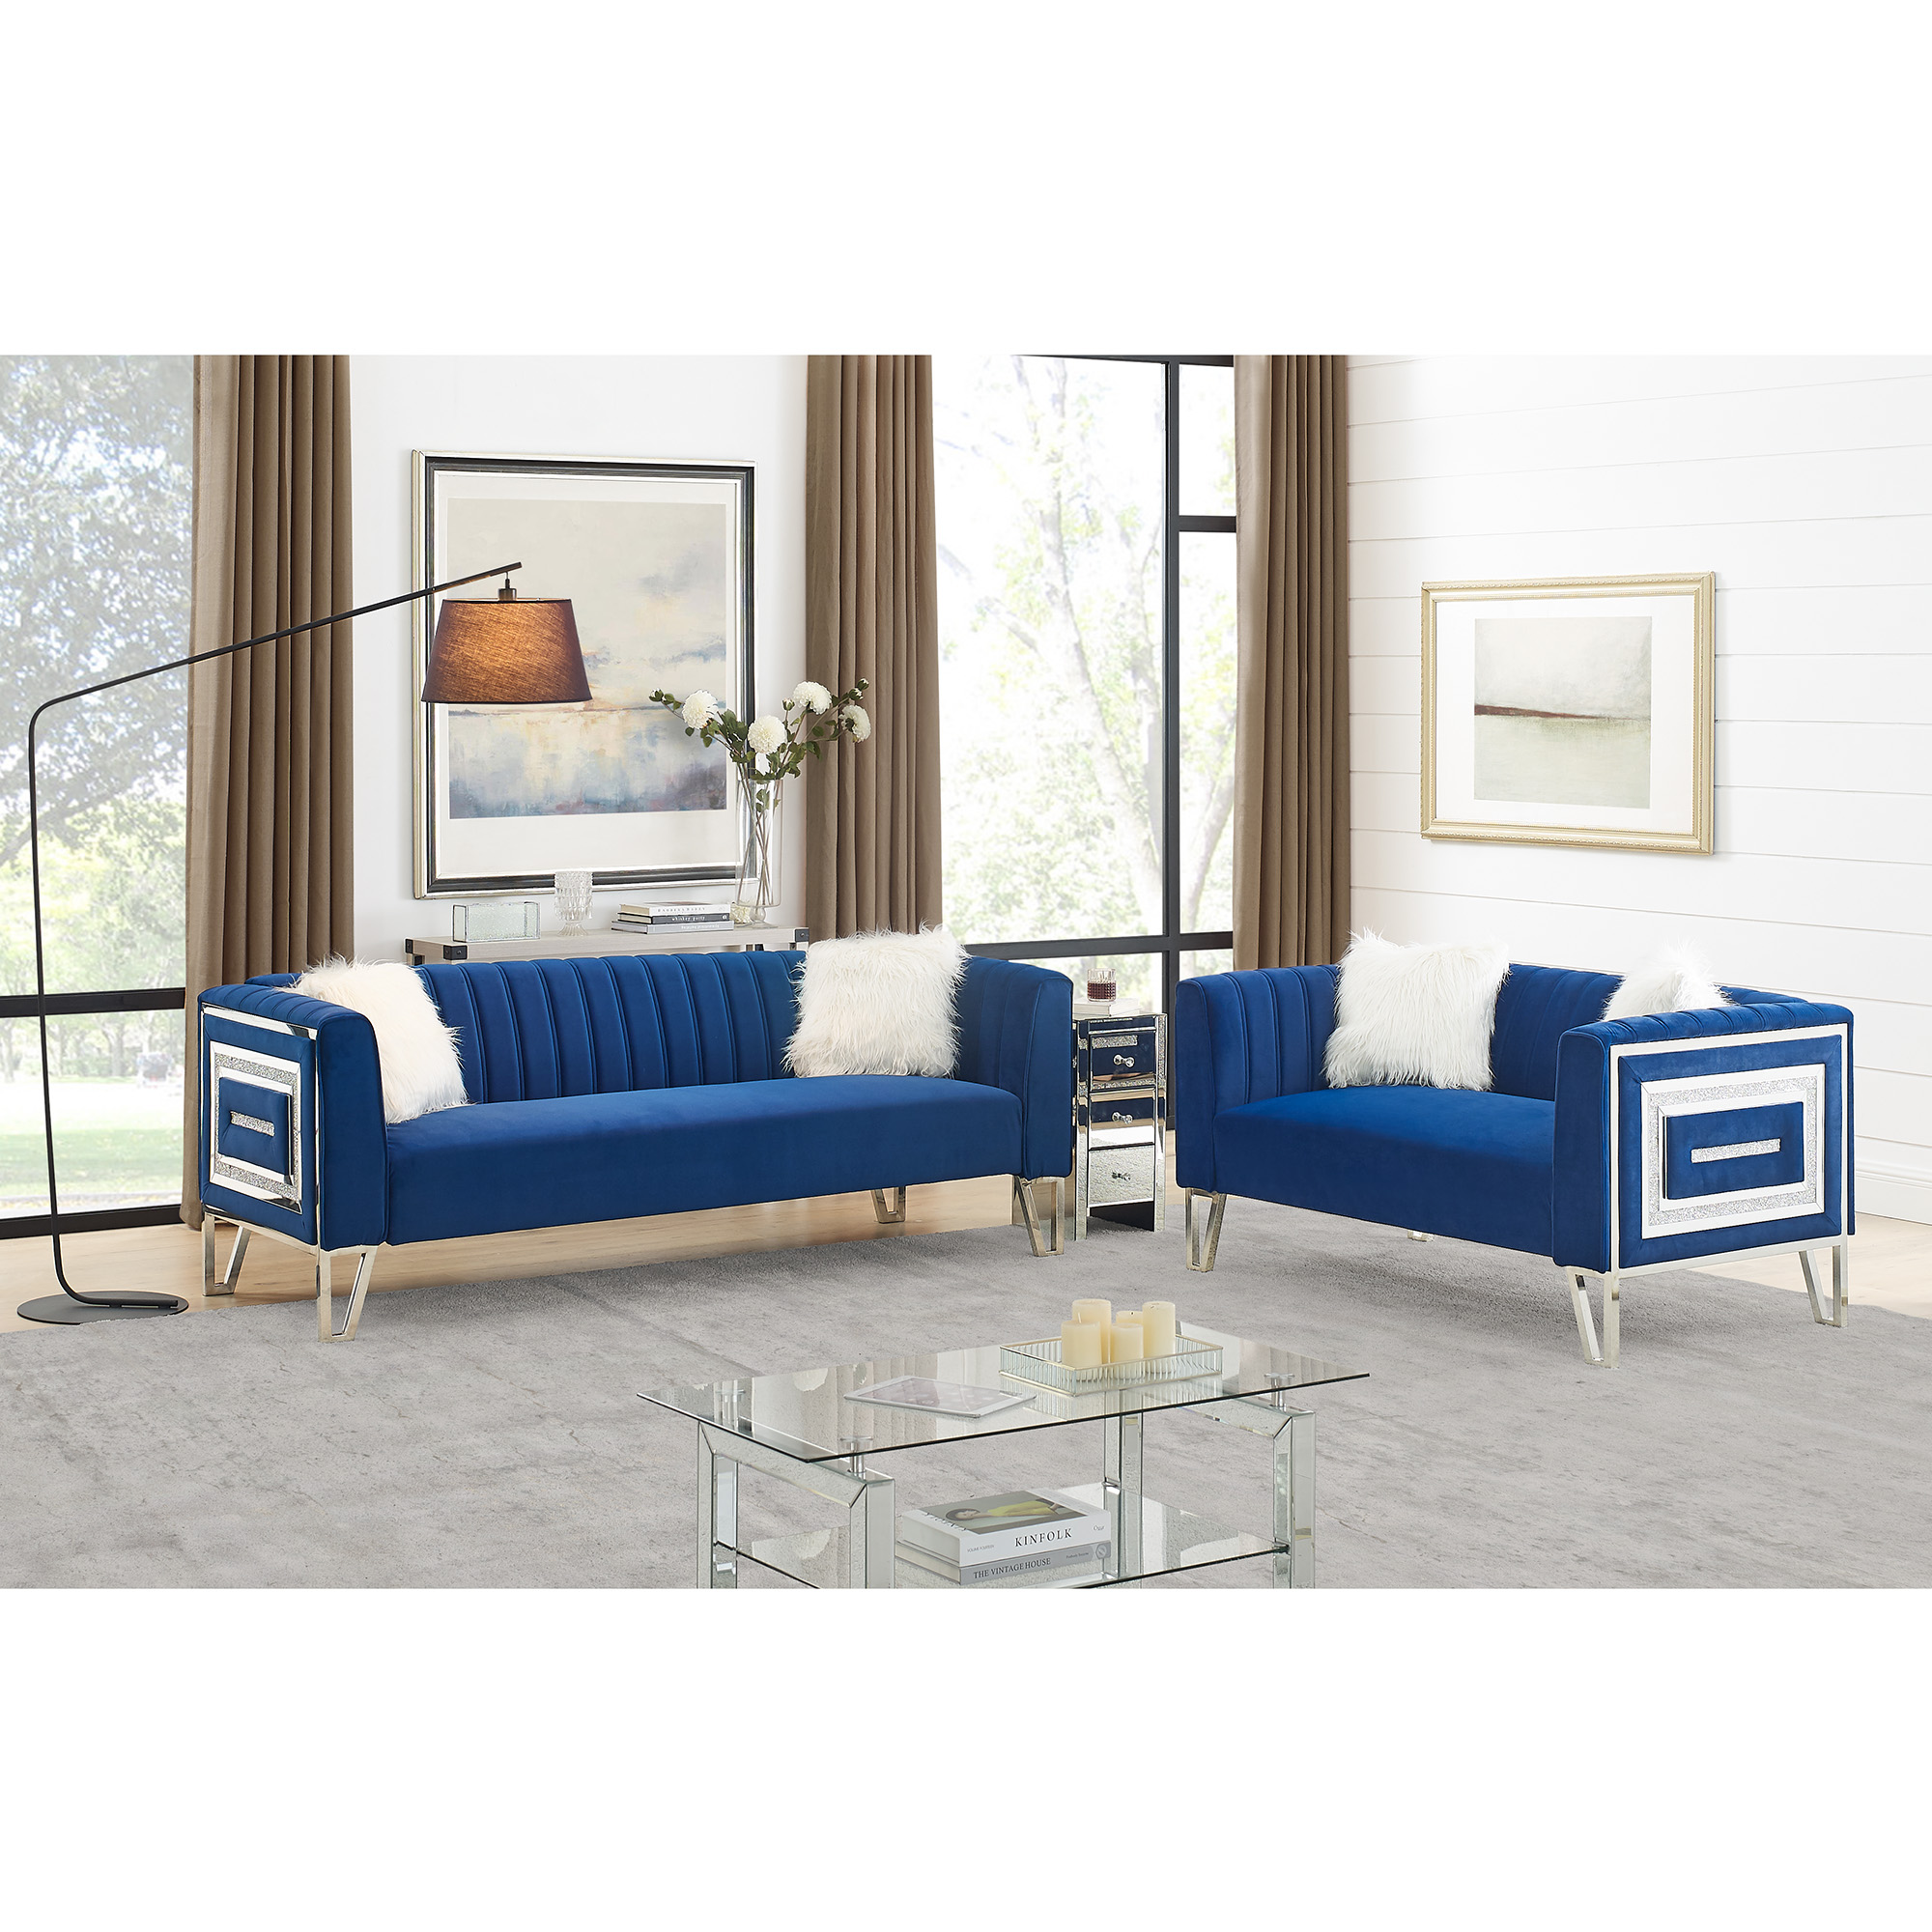 2 Piece Living Room Sofa Set, including 3-Seater Sofa and Loveseat, with Mirrored Side Trim with Faux Diamonds and Stainless Steel Legs, Four White Villose Pillow, Blue-CASAINC